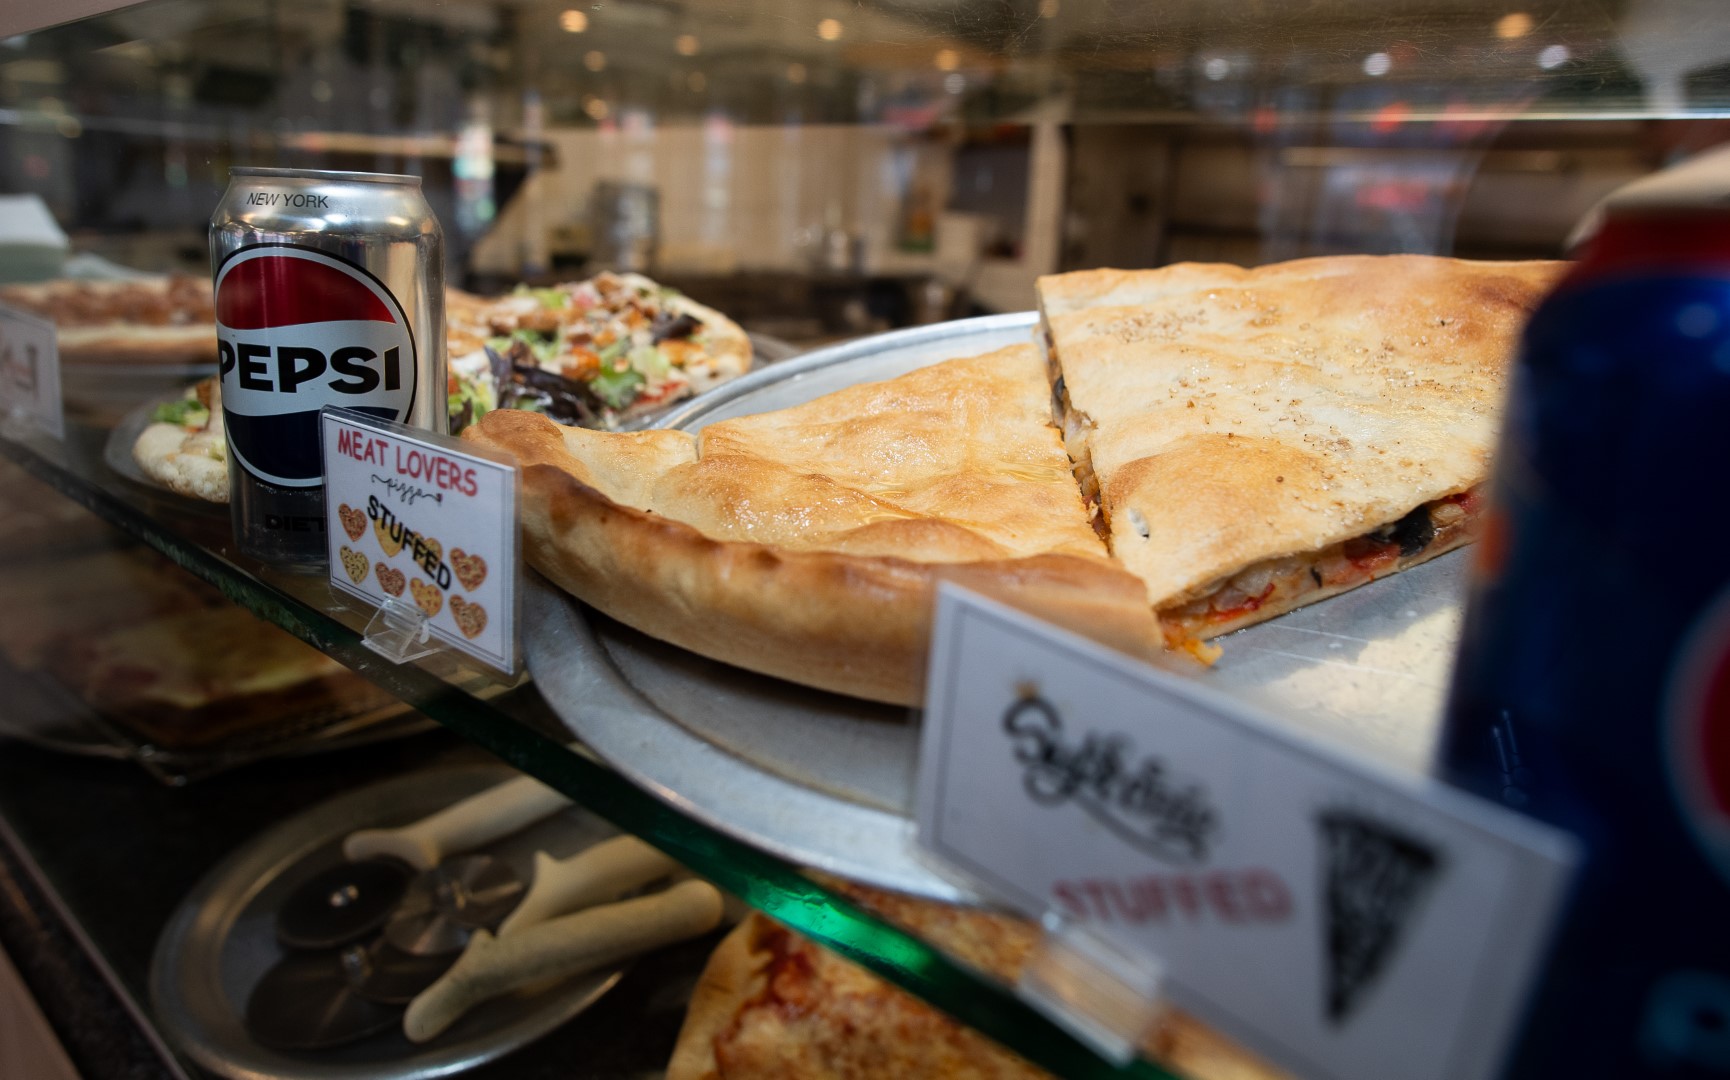 A display case at a restaurant featuring a variety of pizzas, including a "meat lovers" and a "stuffed" pizza, with a can of pepsi visible in the background.